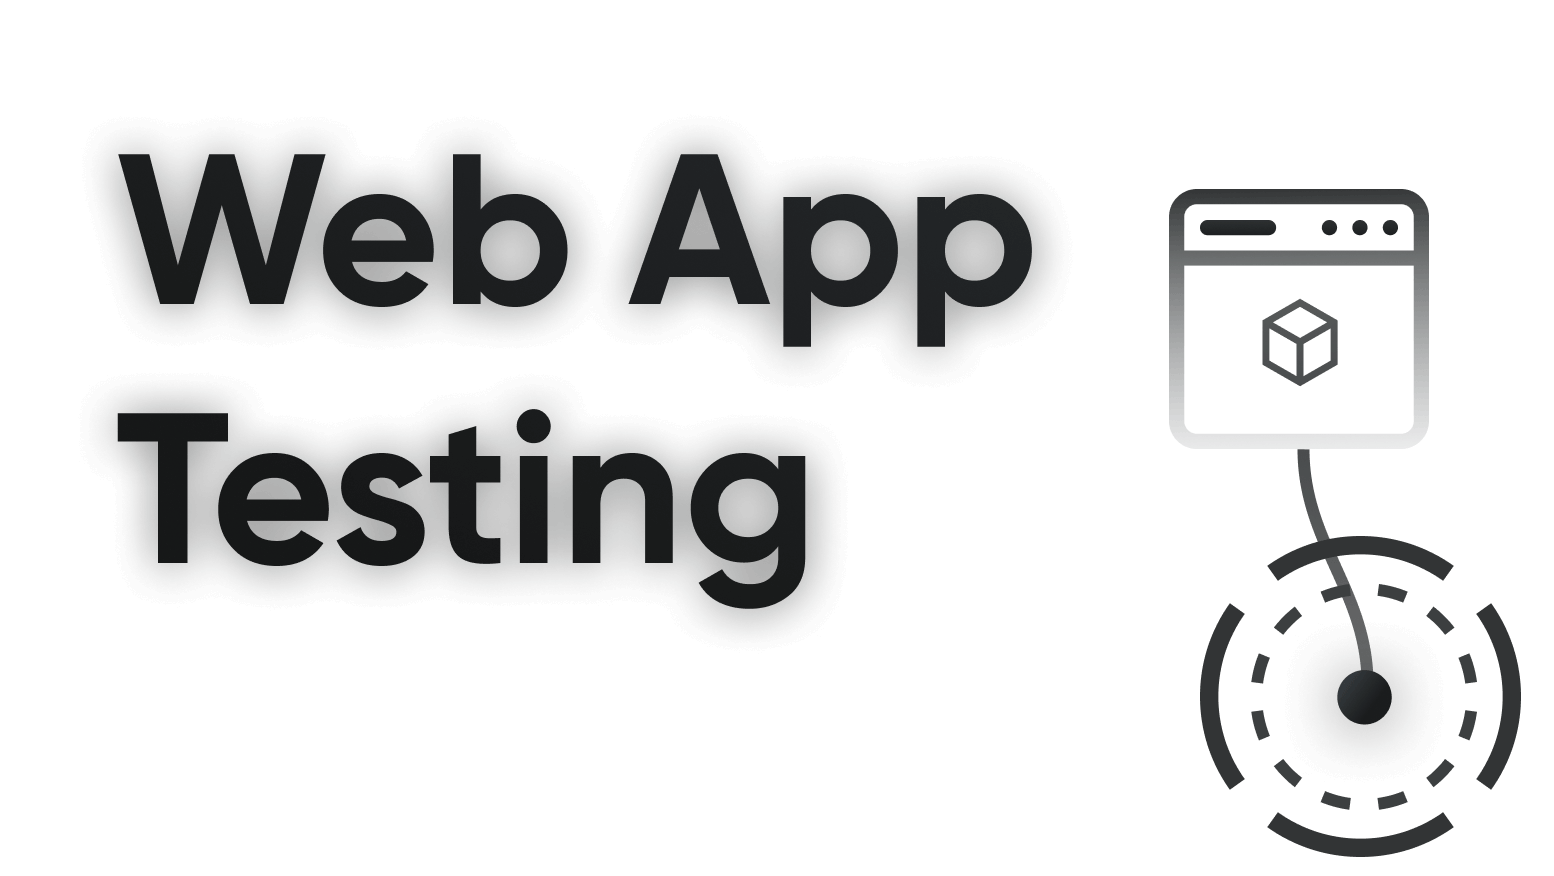 Testing a Web App with the  Web App Tester 